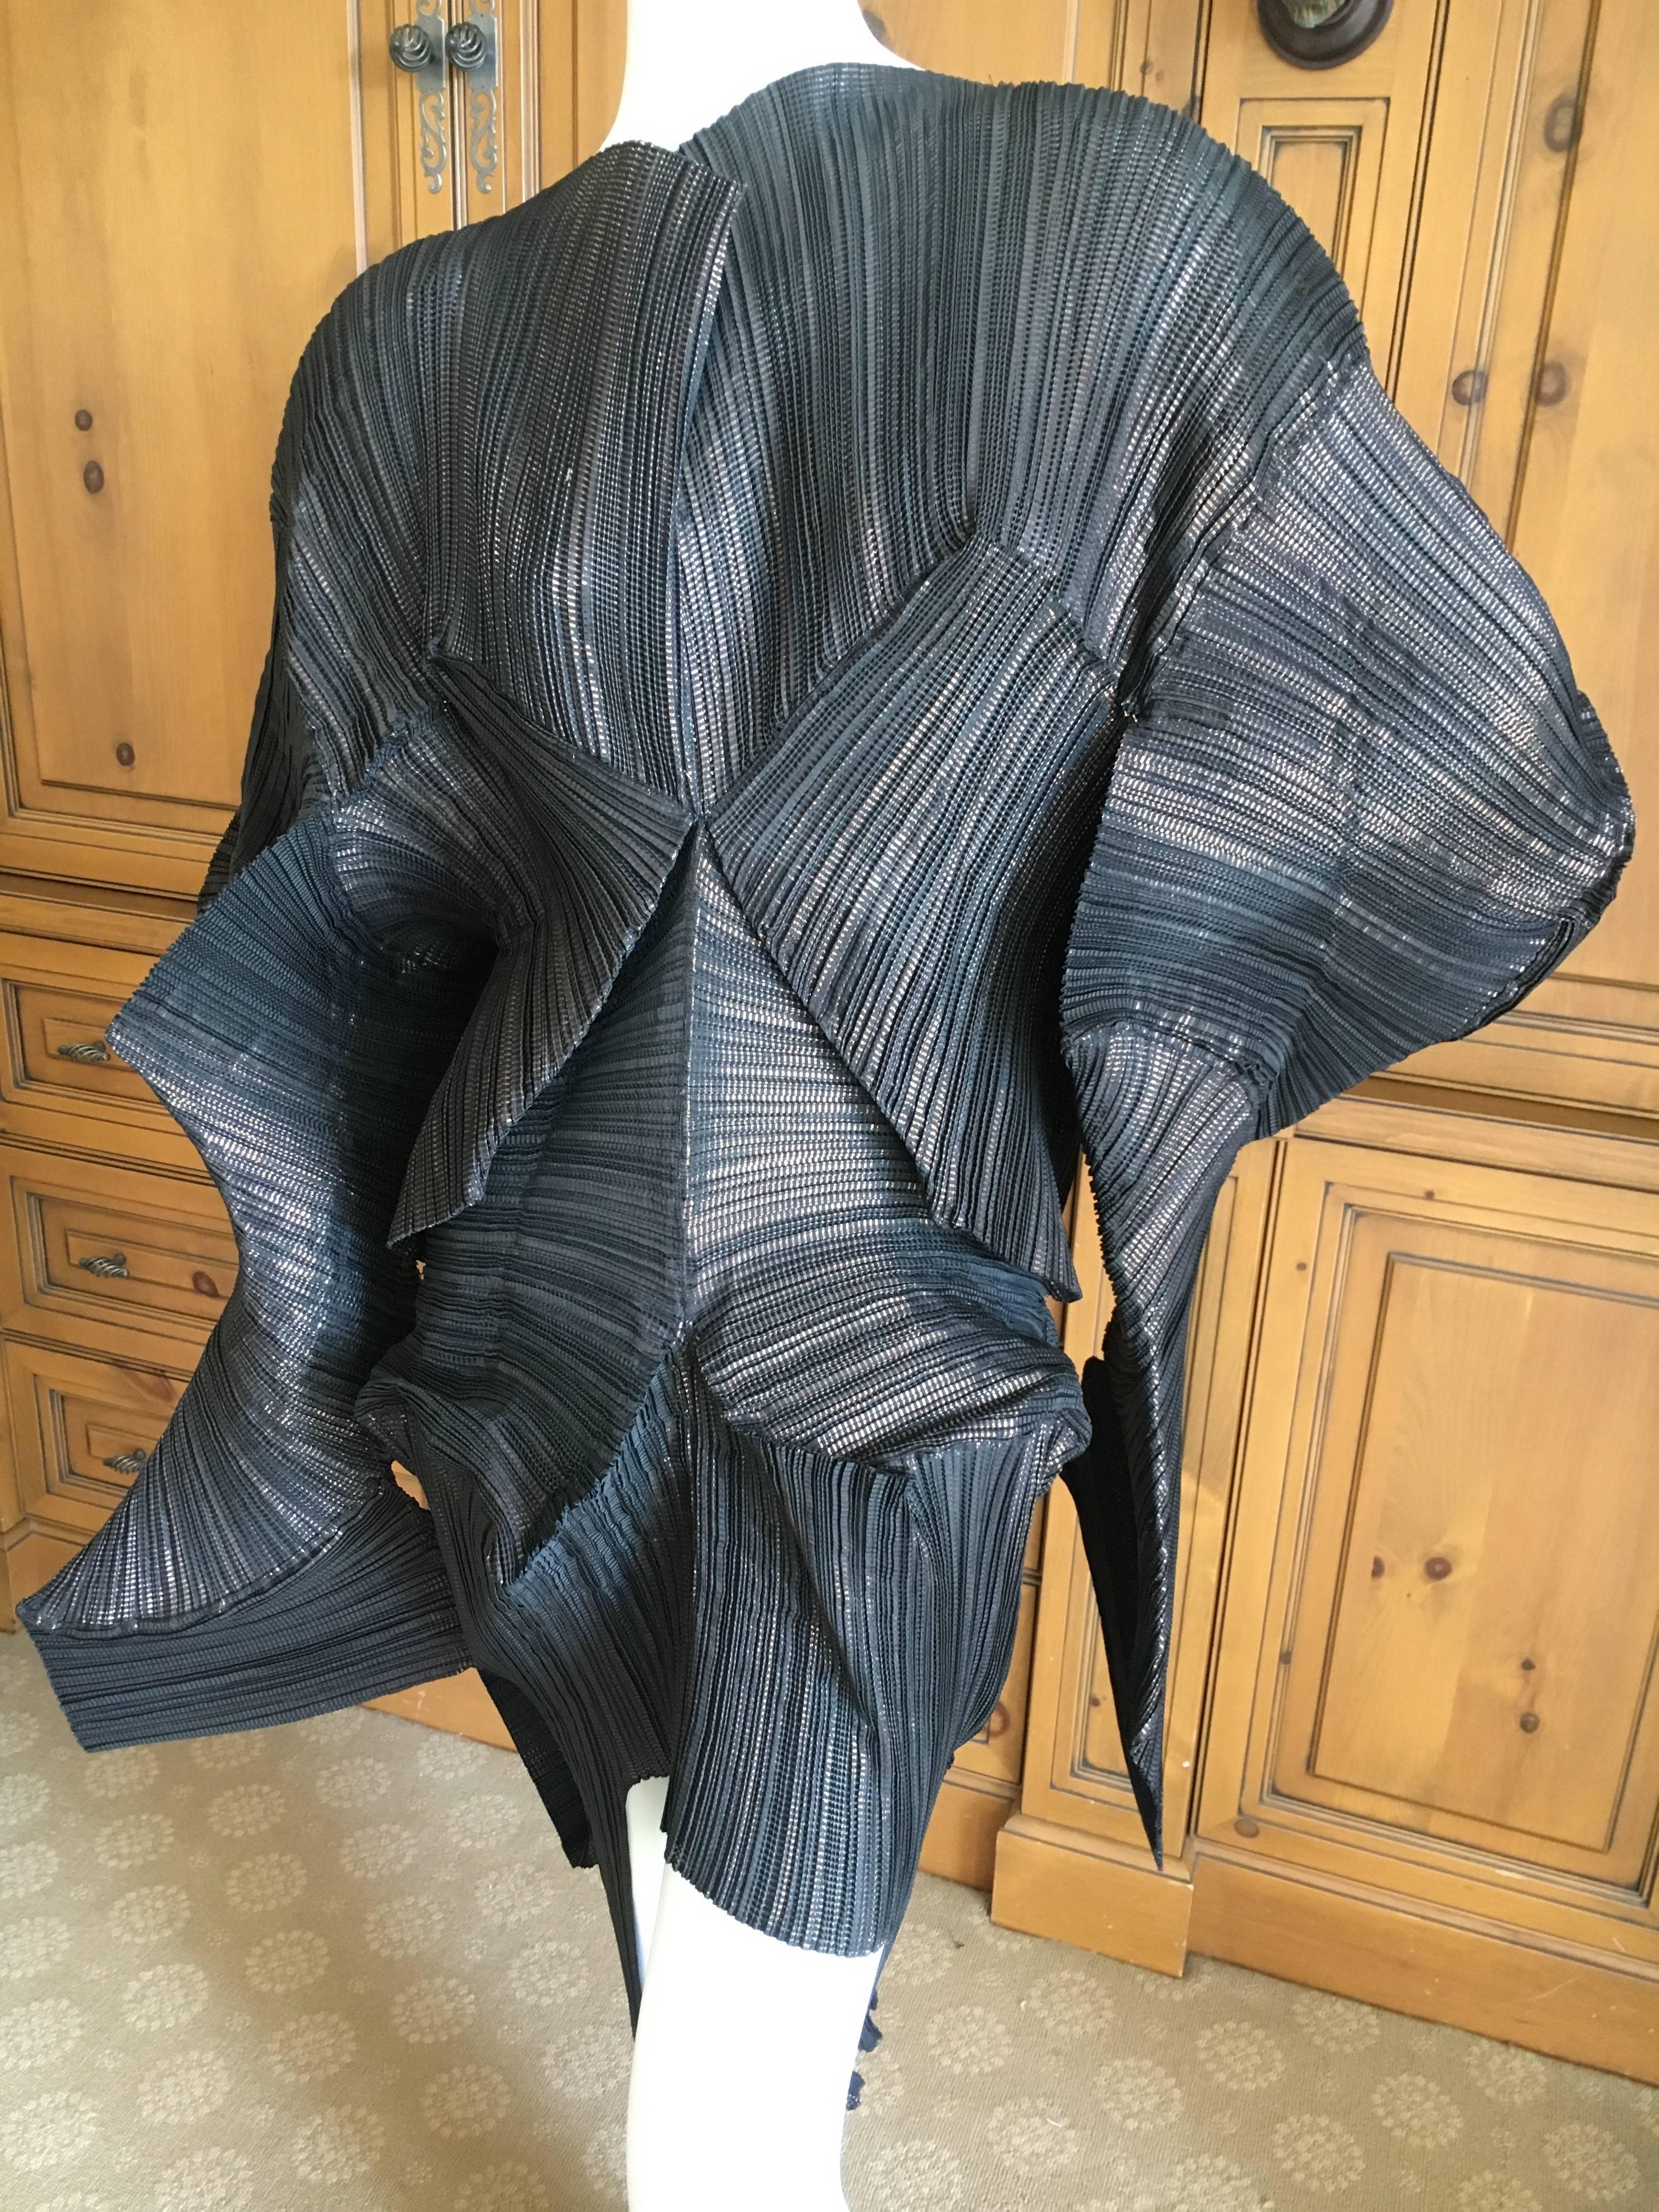 Issey Miyake Important Museum Exhibited 1980's Sculptural Black "Escargot" Dress.
This is amazing, must be seen to be appreciated. 
Last photo shows this dress at a Museum exhibition, the dress is titled "Escargot".
One size fits